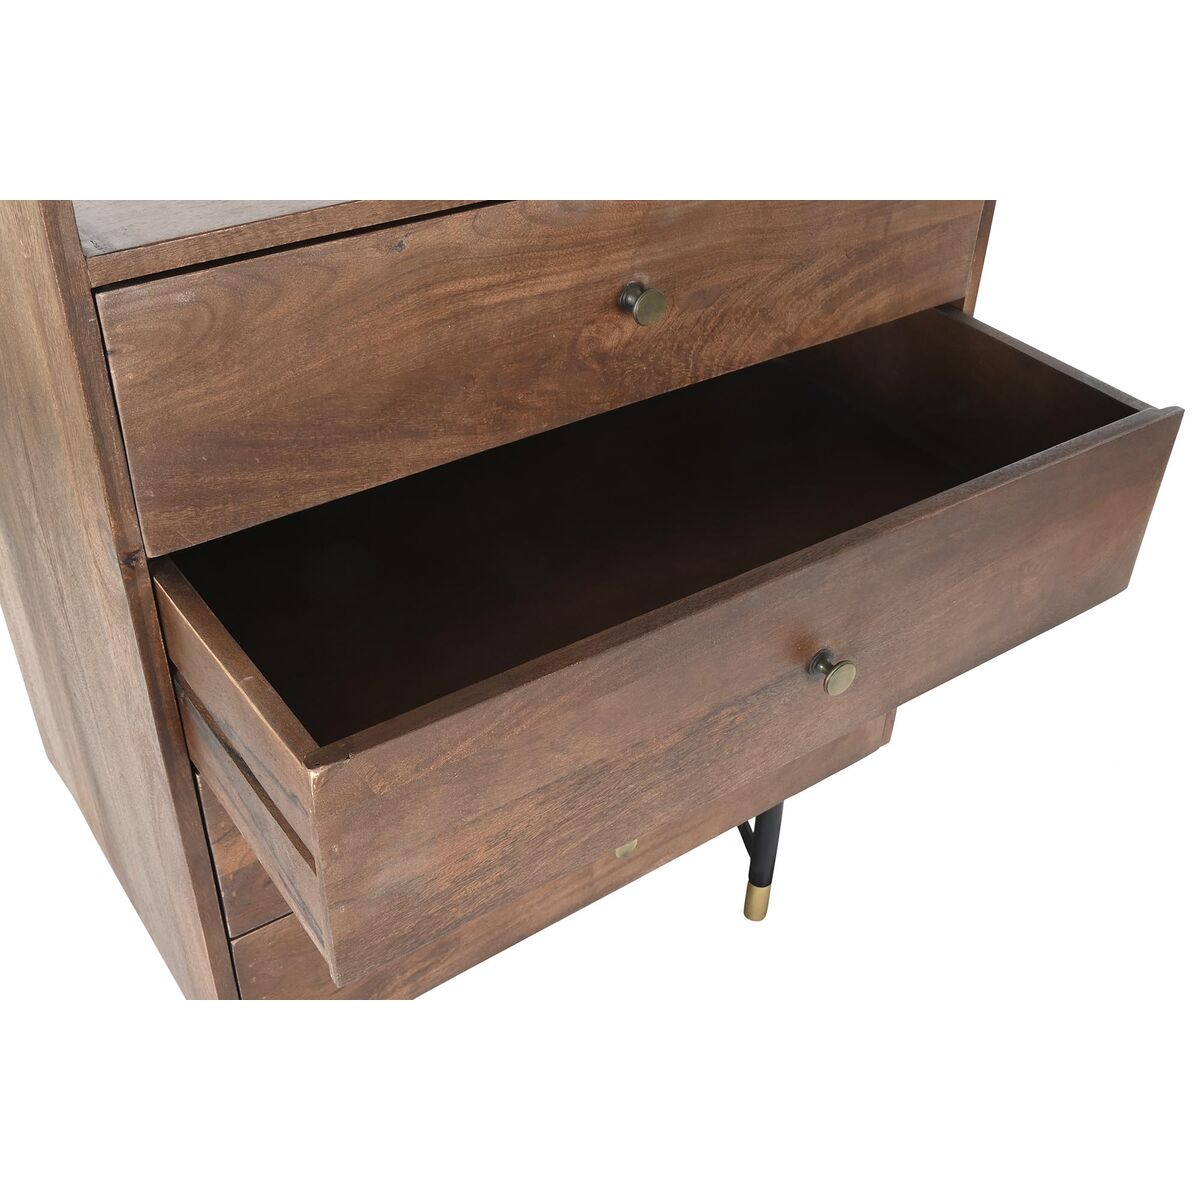 Chest of drawers in Wood with Golden Finish and Black Metal Legs (70 x 45 x 92 cm)